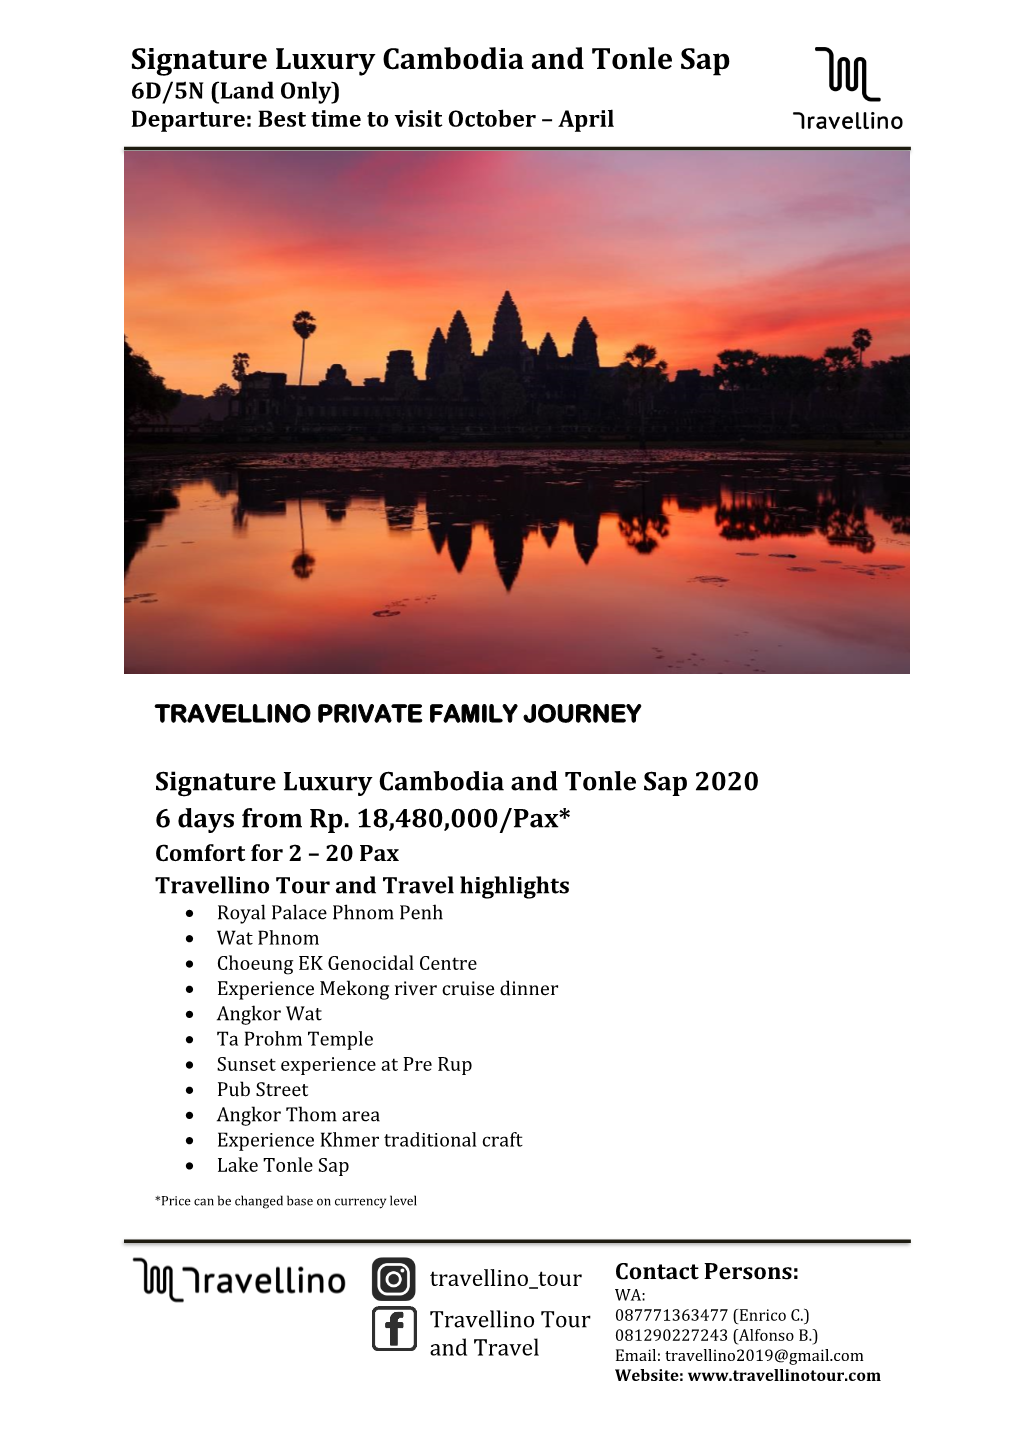 Signature Luxury Cambodia and Tonle Sap 6D/5N (Land Only) Departure: Best Time to Visit October – April